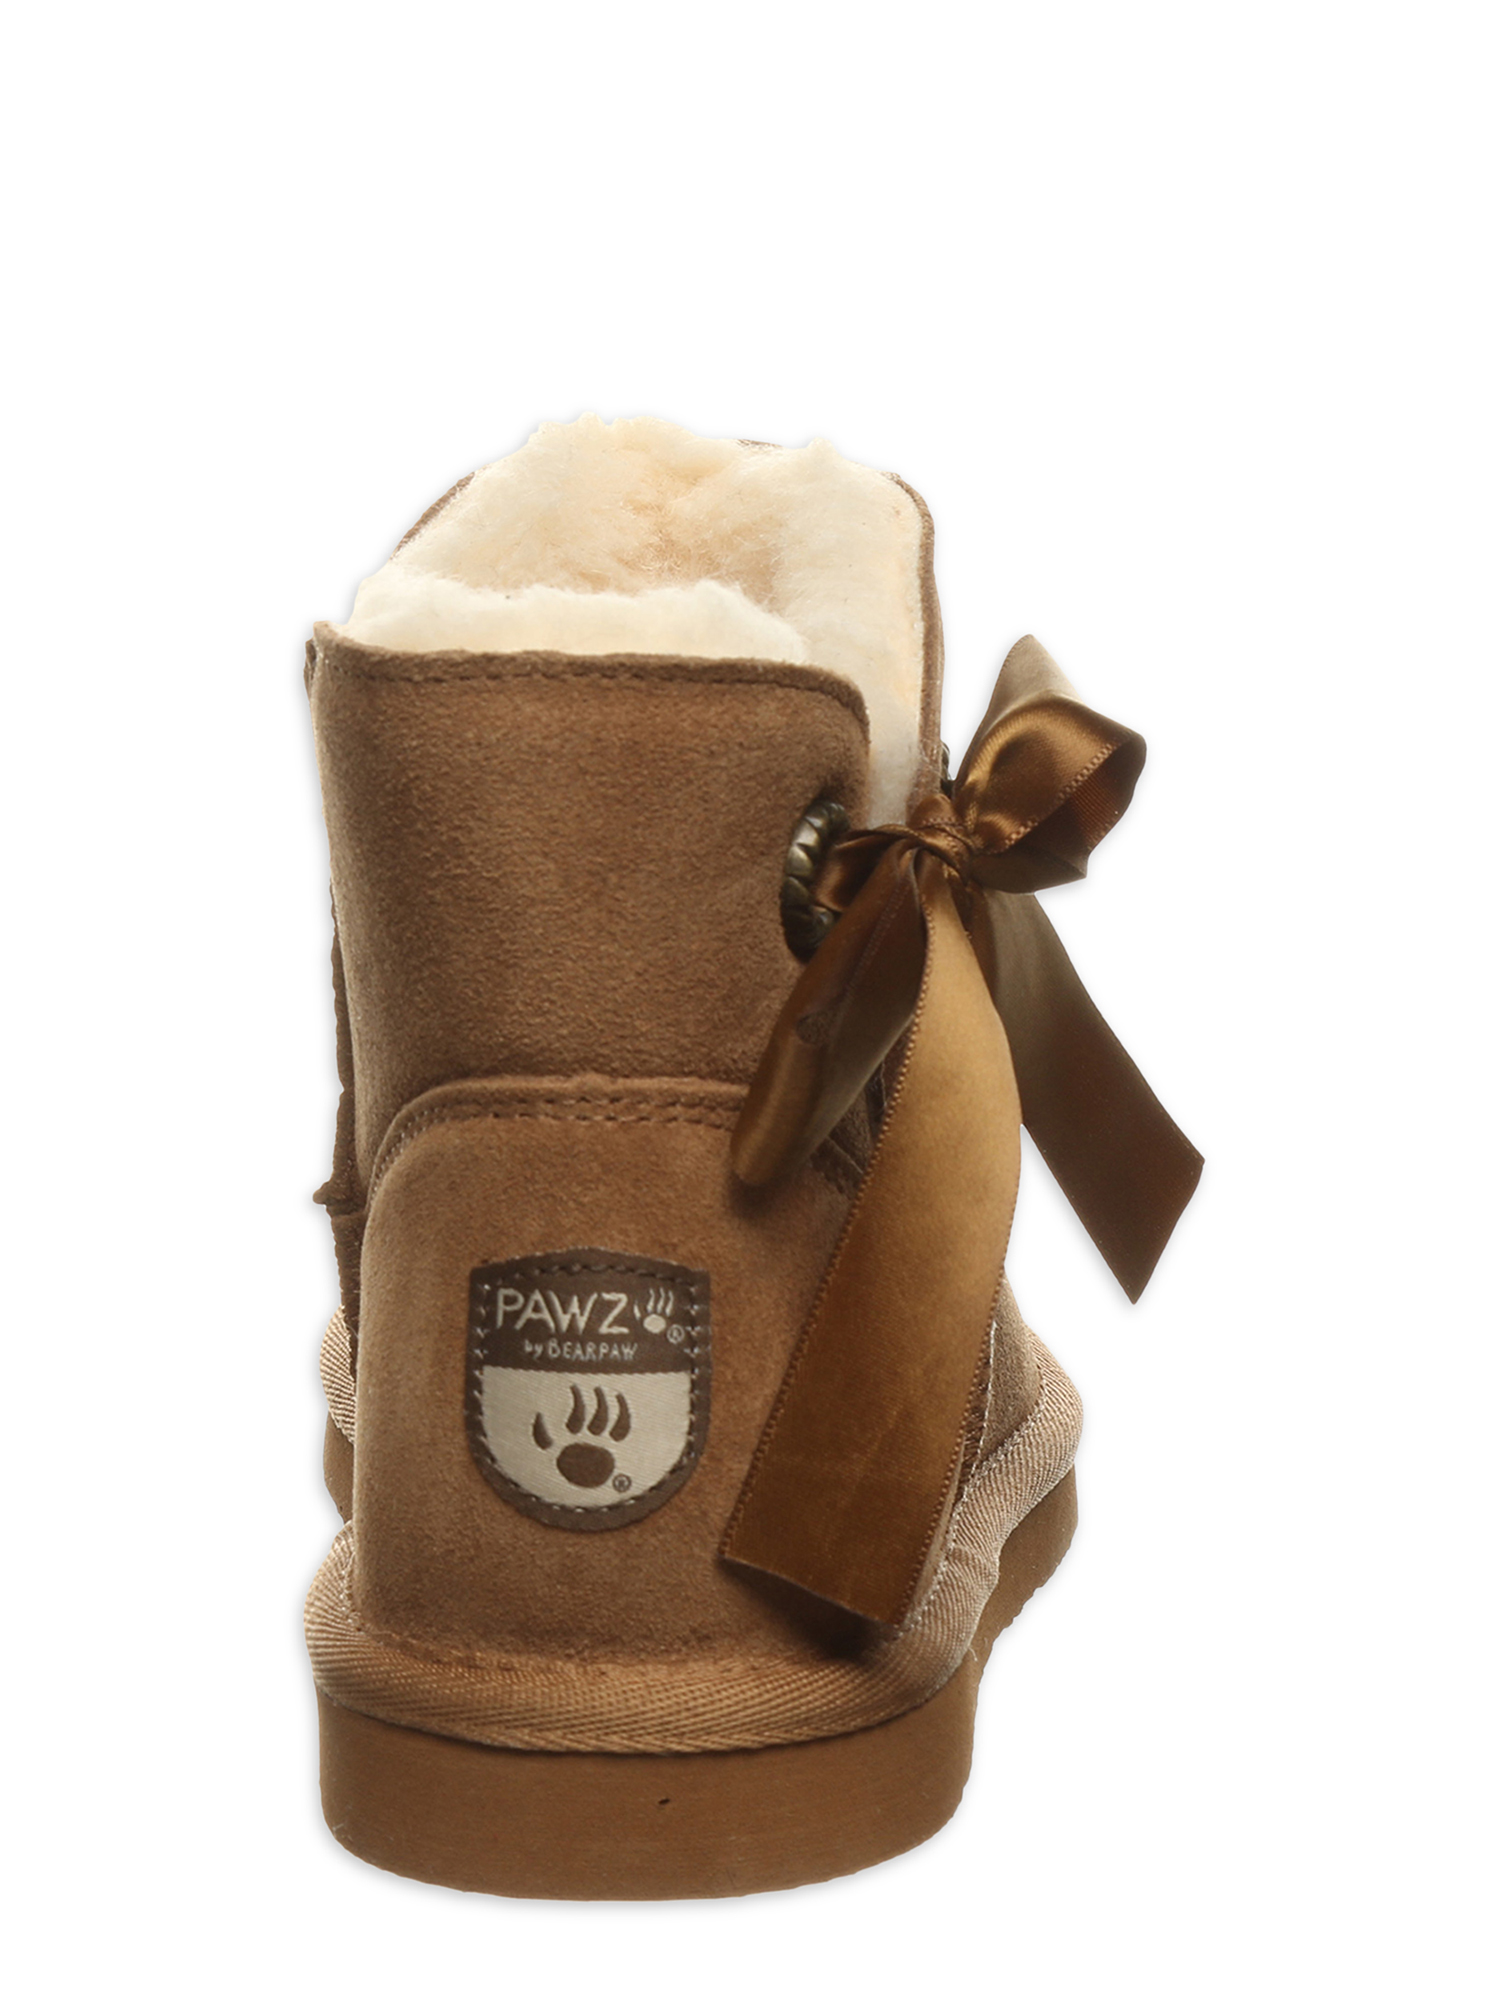 Pawz by Bearpaw Womens Journey Faux Fur Lined Suede Ankle Bow Bootie - image 3 of 5